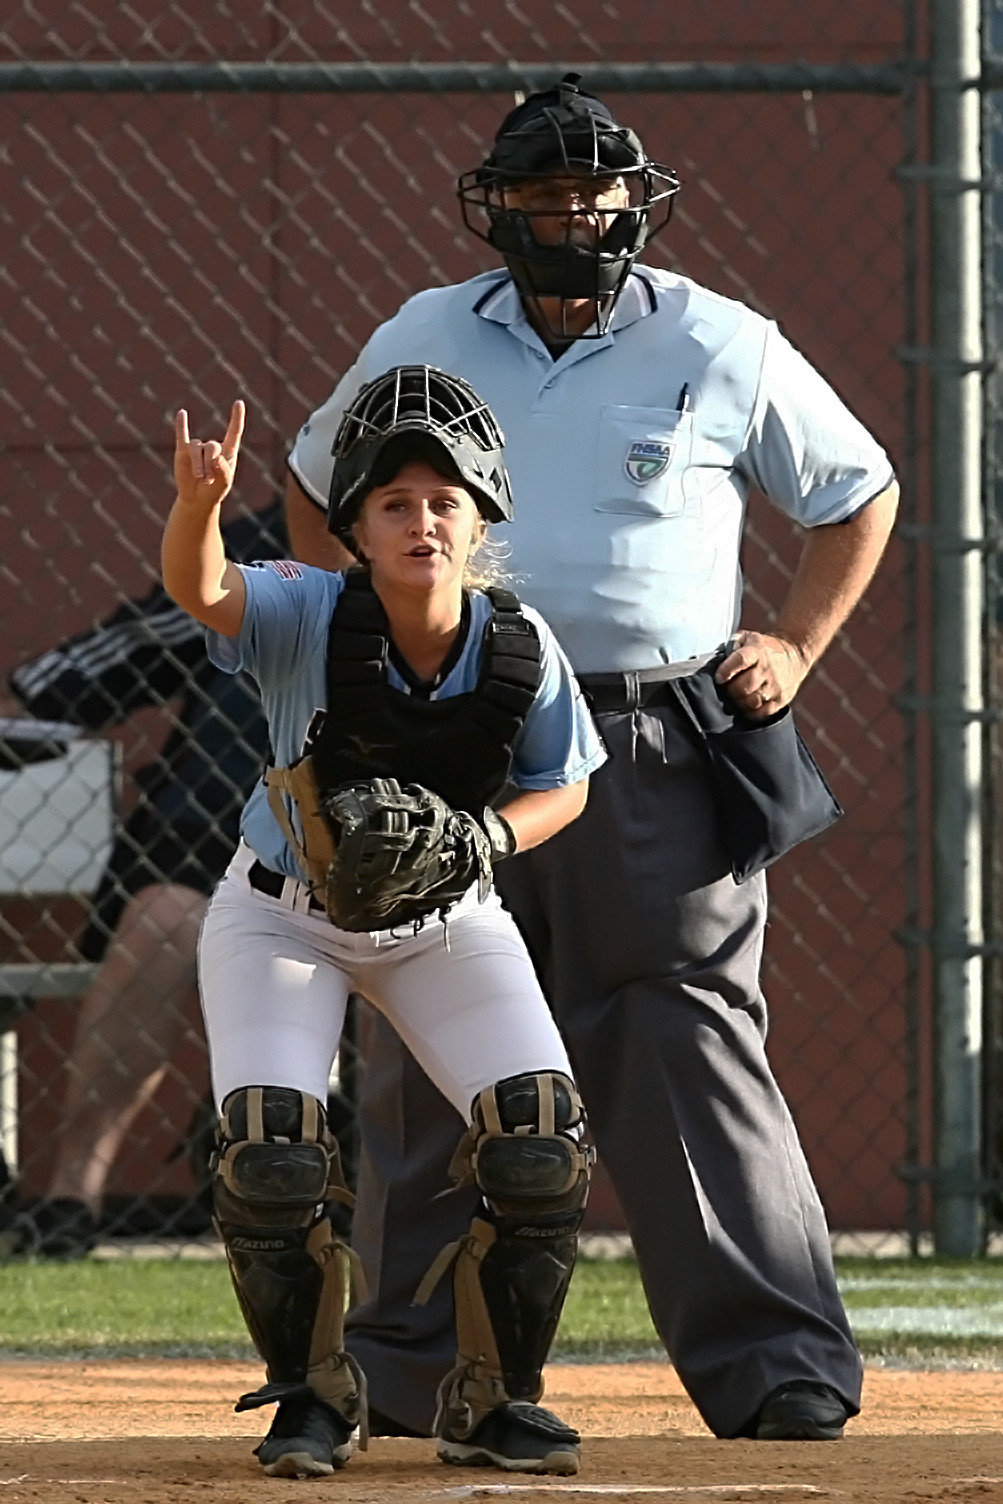 Shark catcher Taylor Bradshaw signals to her teammates that there are two outs in the inning.